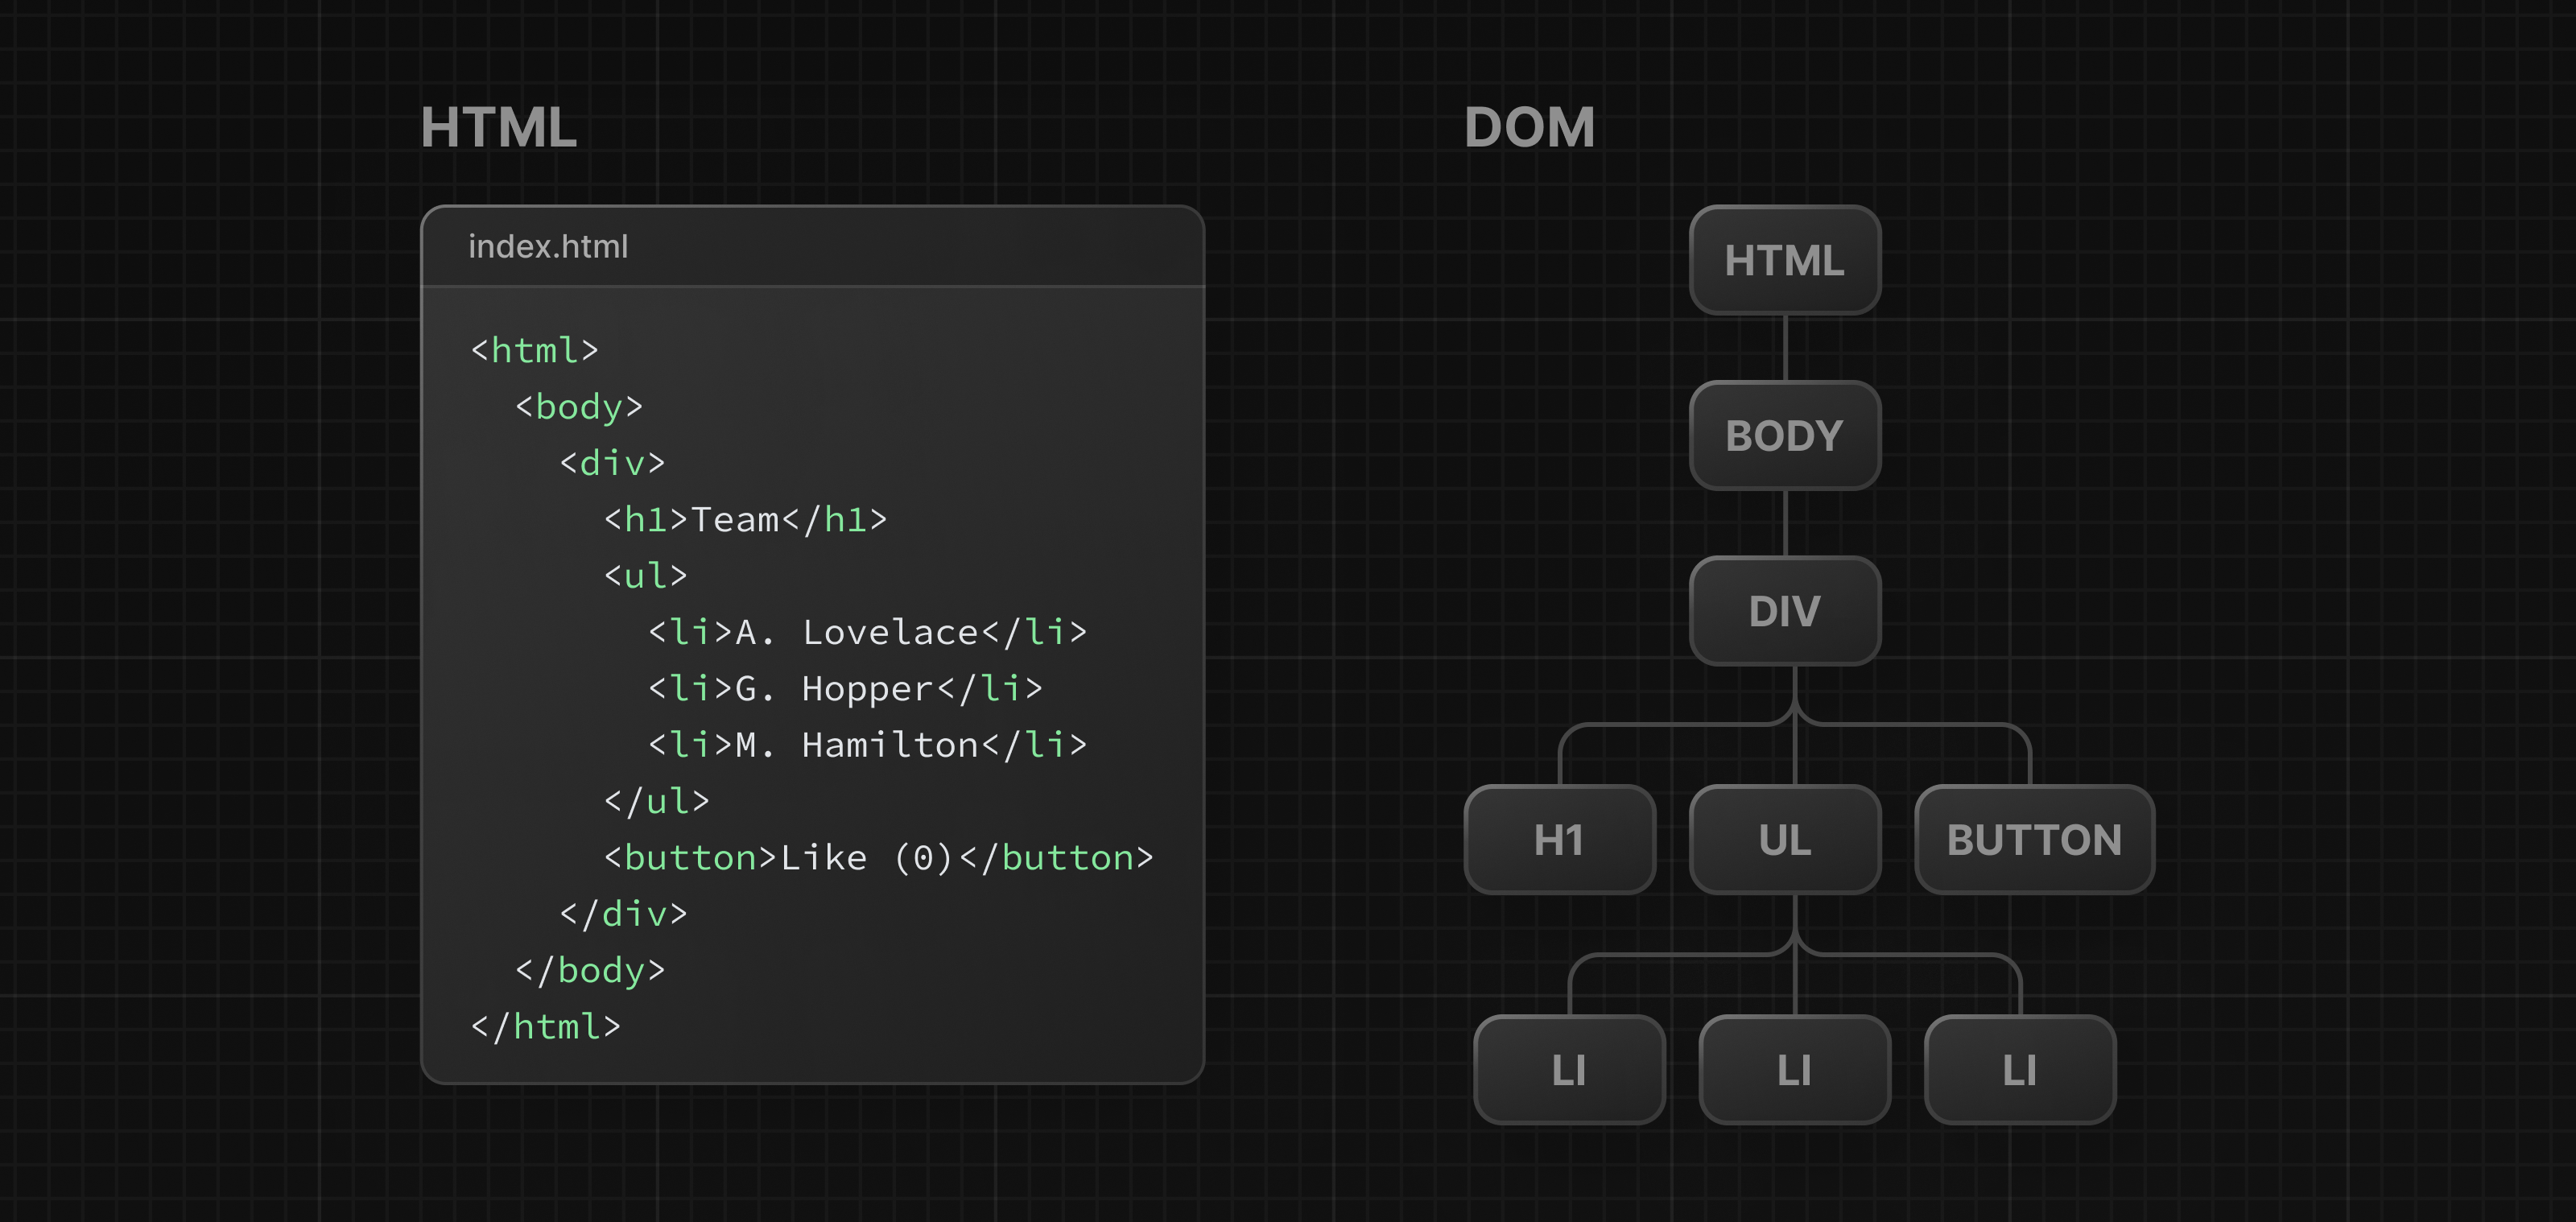 Two side-by-side diagrams, left showing the HTML code, and right showing the DOM tree.